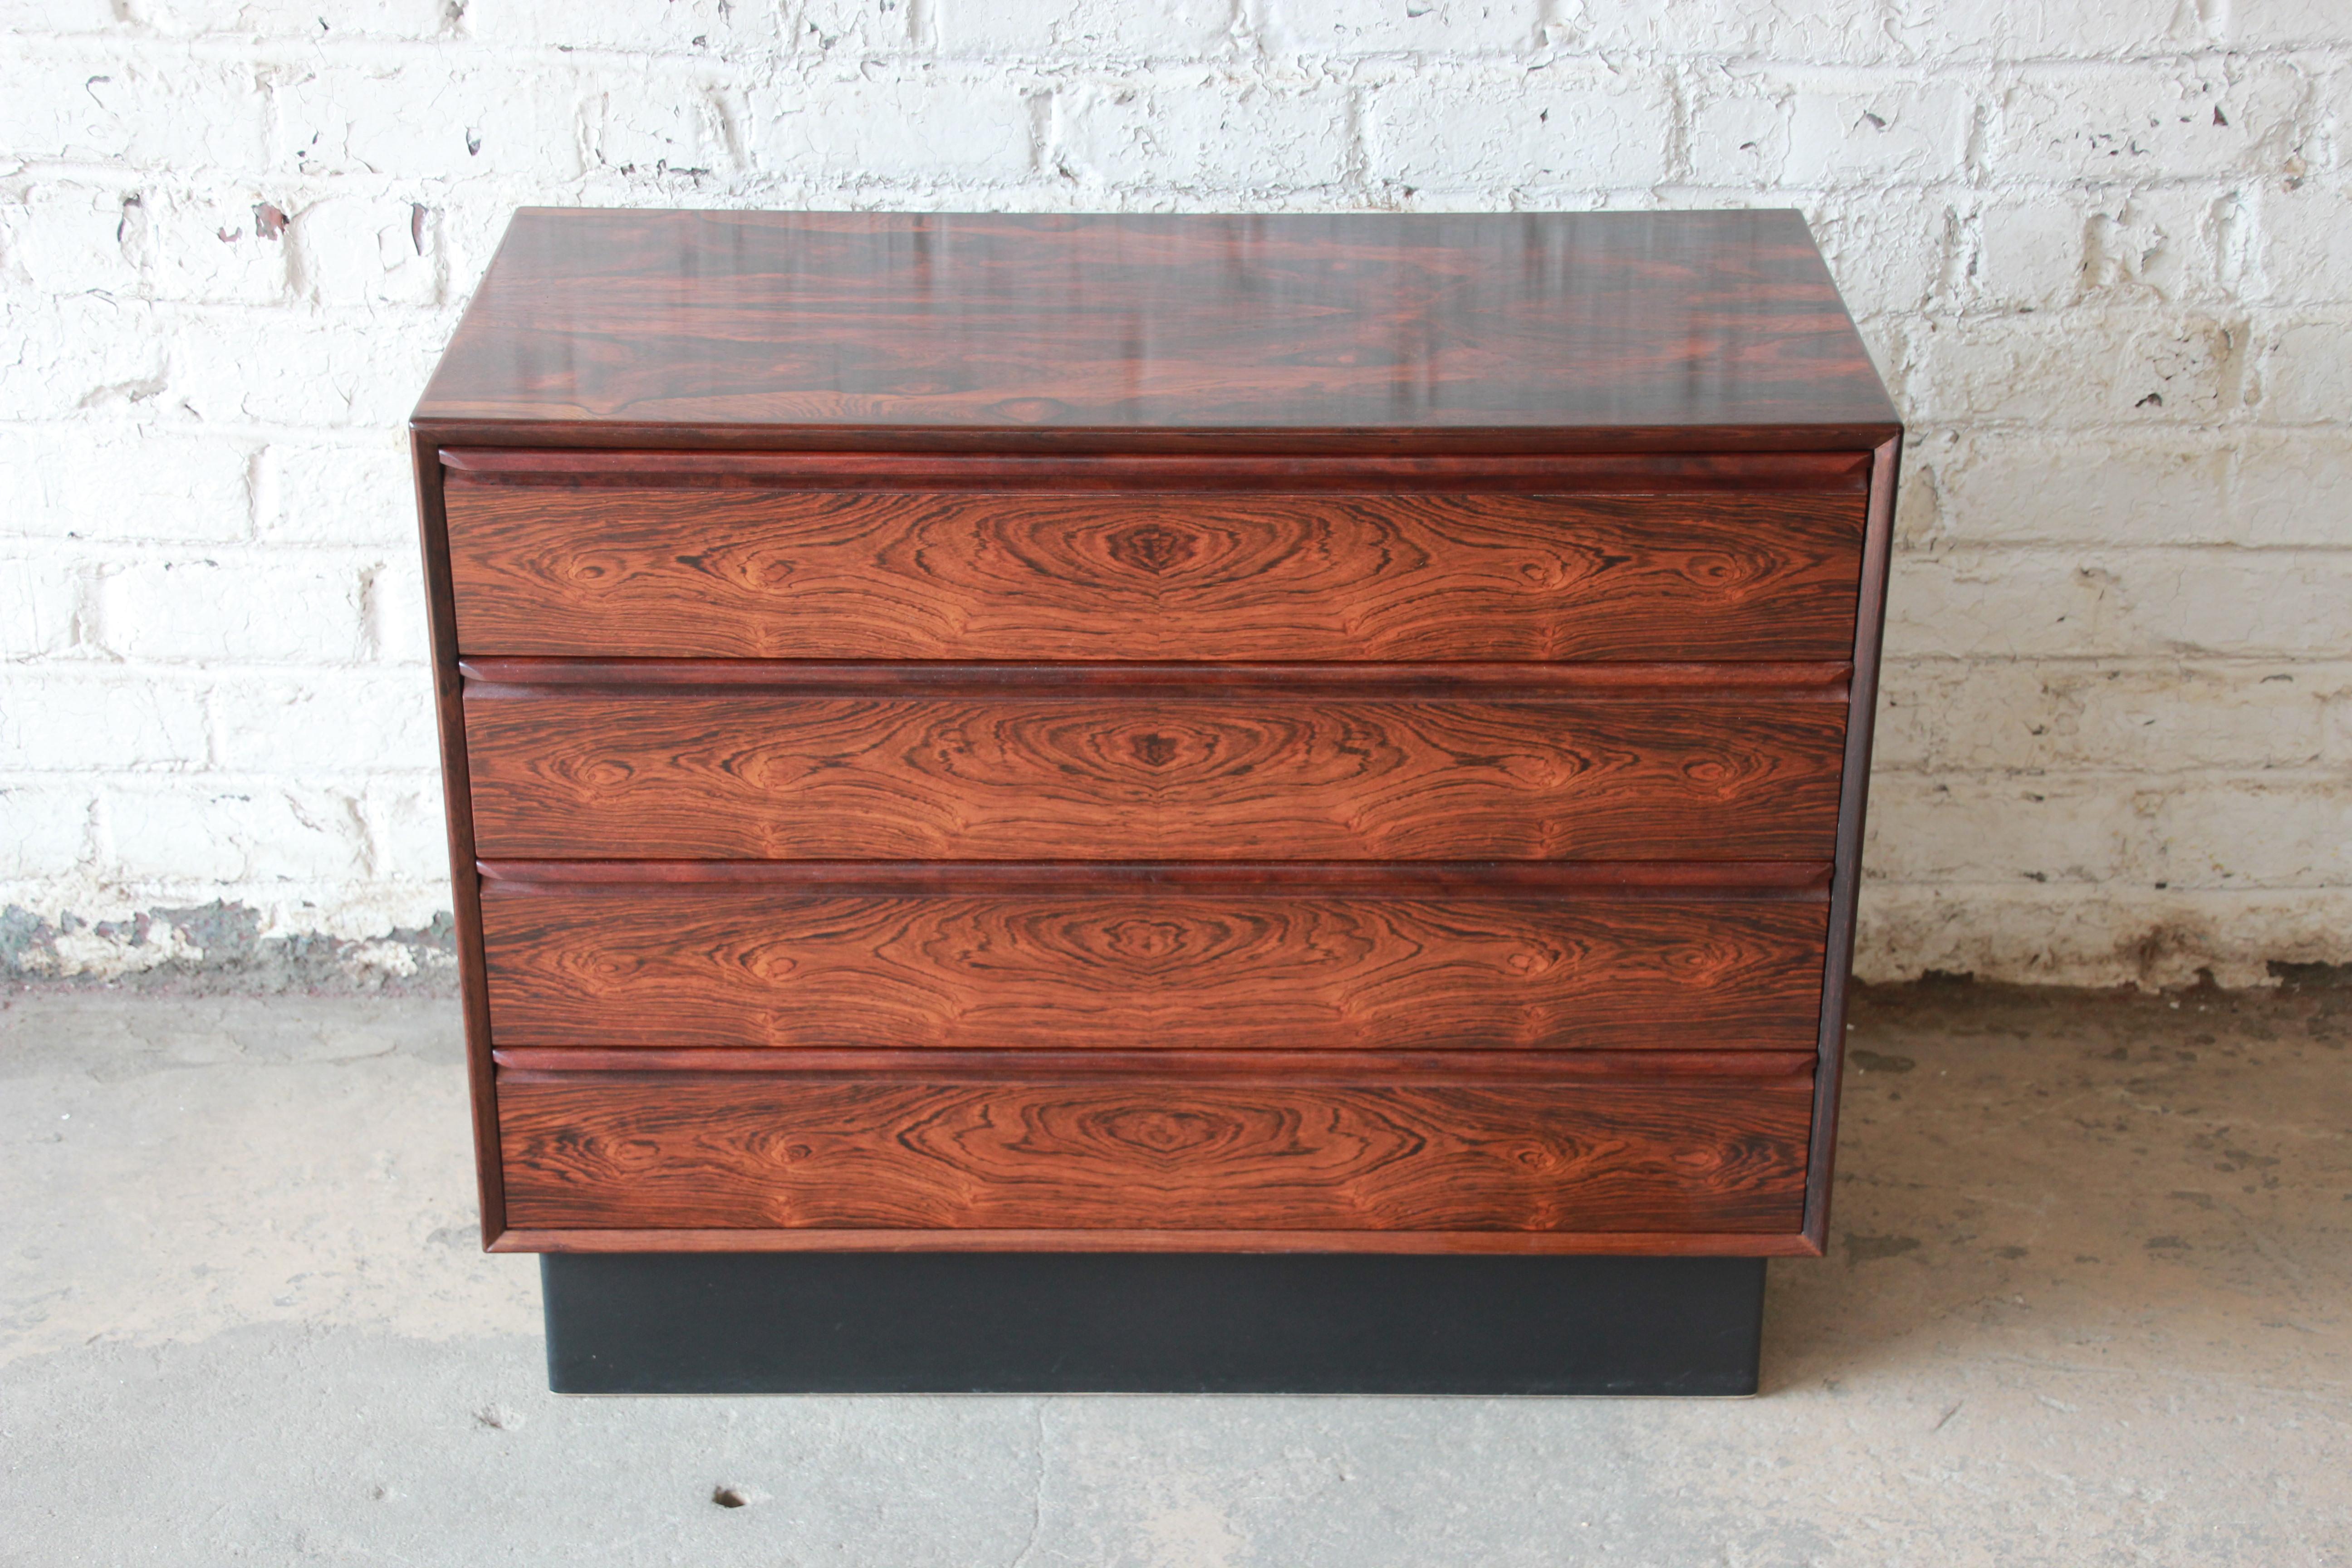 Offering an amazing Norwegian rosewood bachelor chest or dresser by Westnofa. This four-drawer chest has an incredible rosewood graining with sculpted pulls and smooth sliding drawers. It sits on a leather plinth base and is a great statement piece